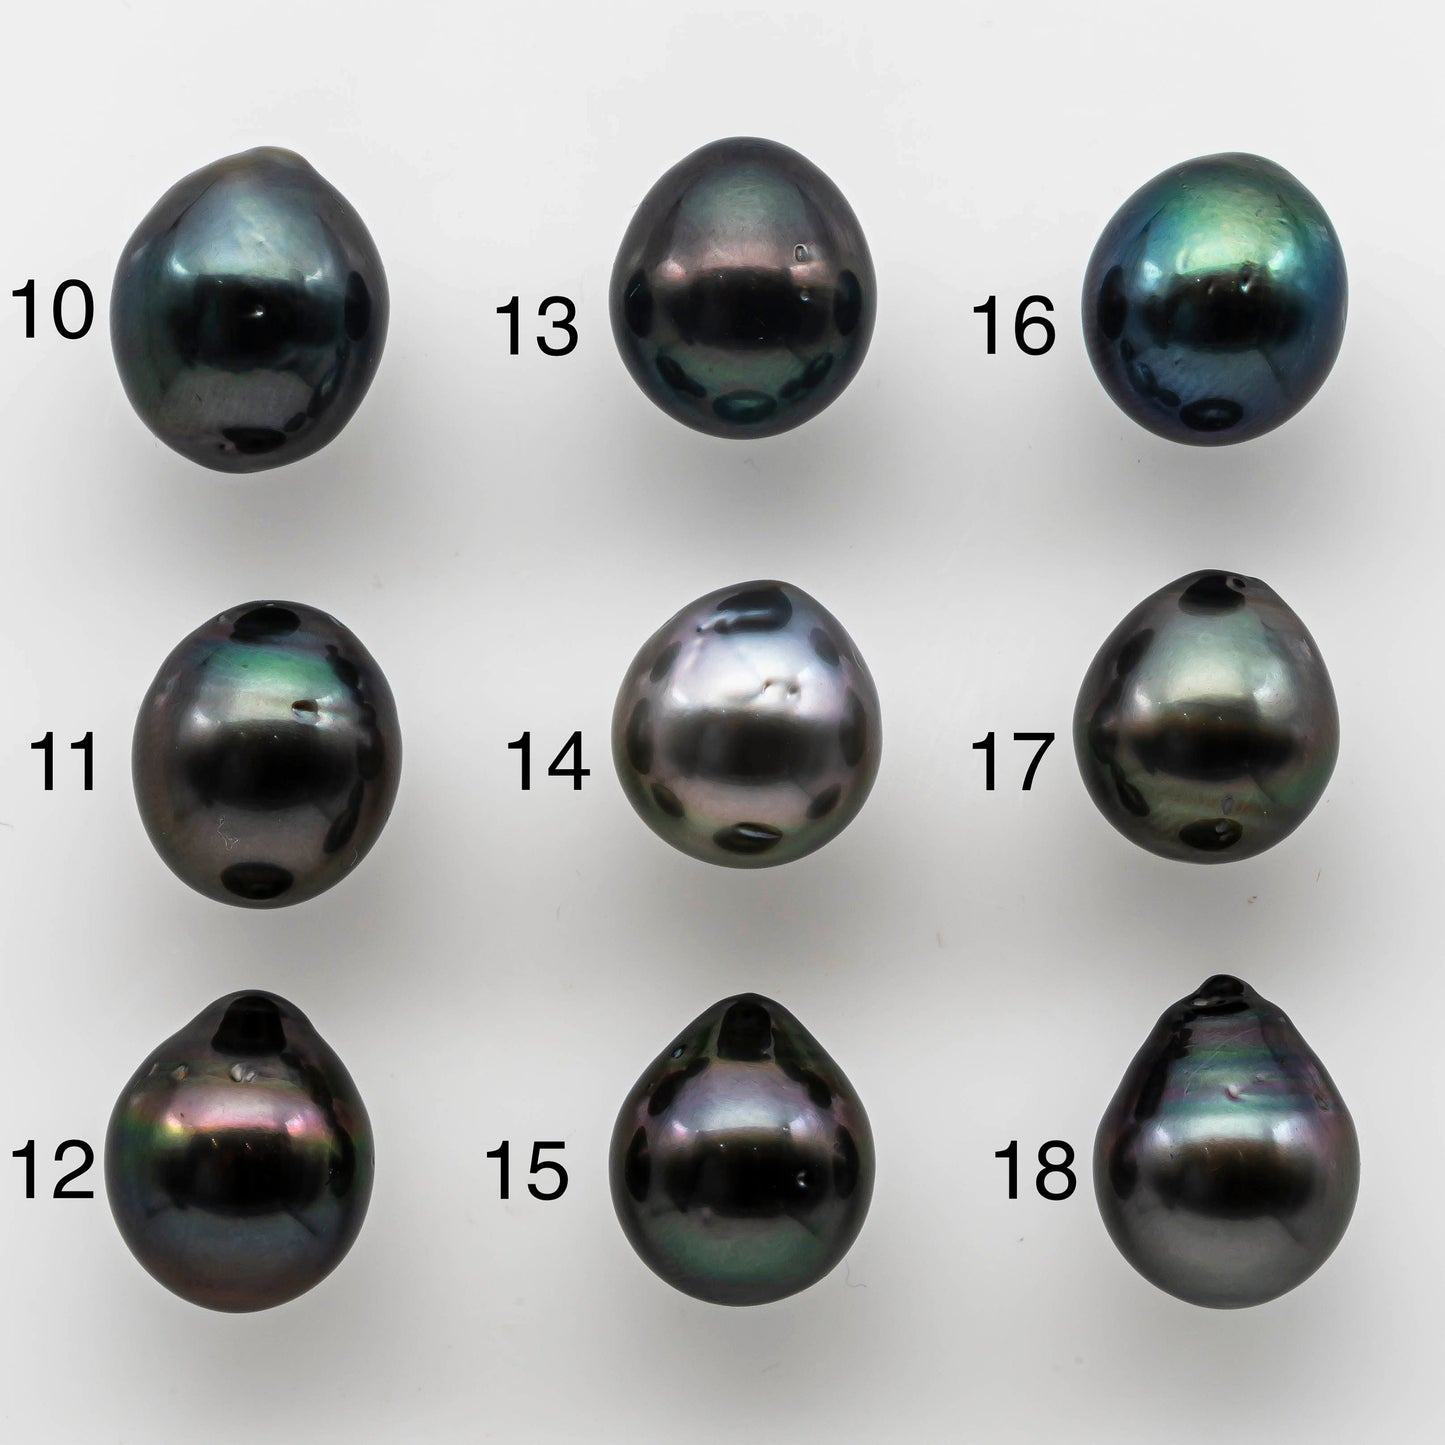 11-12mm Beautiful Tahitian Pearl Drop Shape in Loose Undrilled Single Piece Natural Color and High Luster with Blemishes, SKU # 1500TH